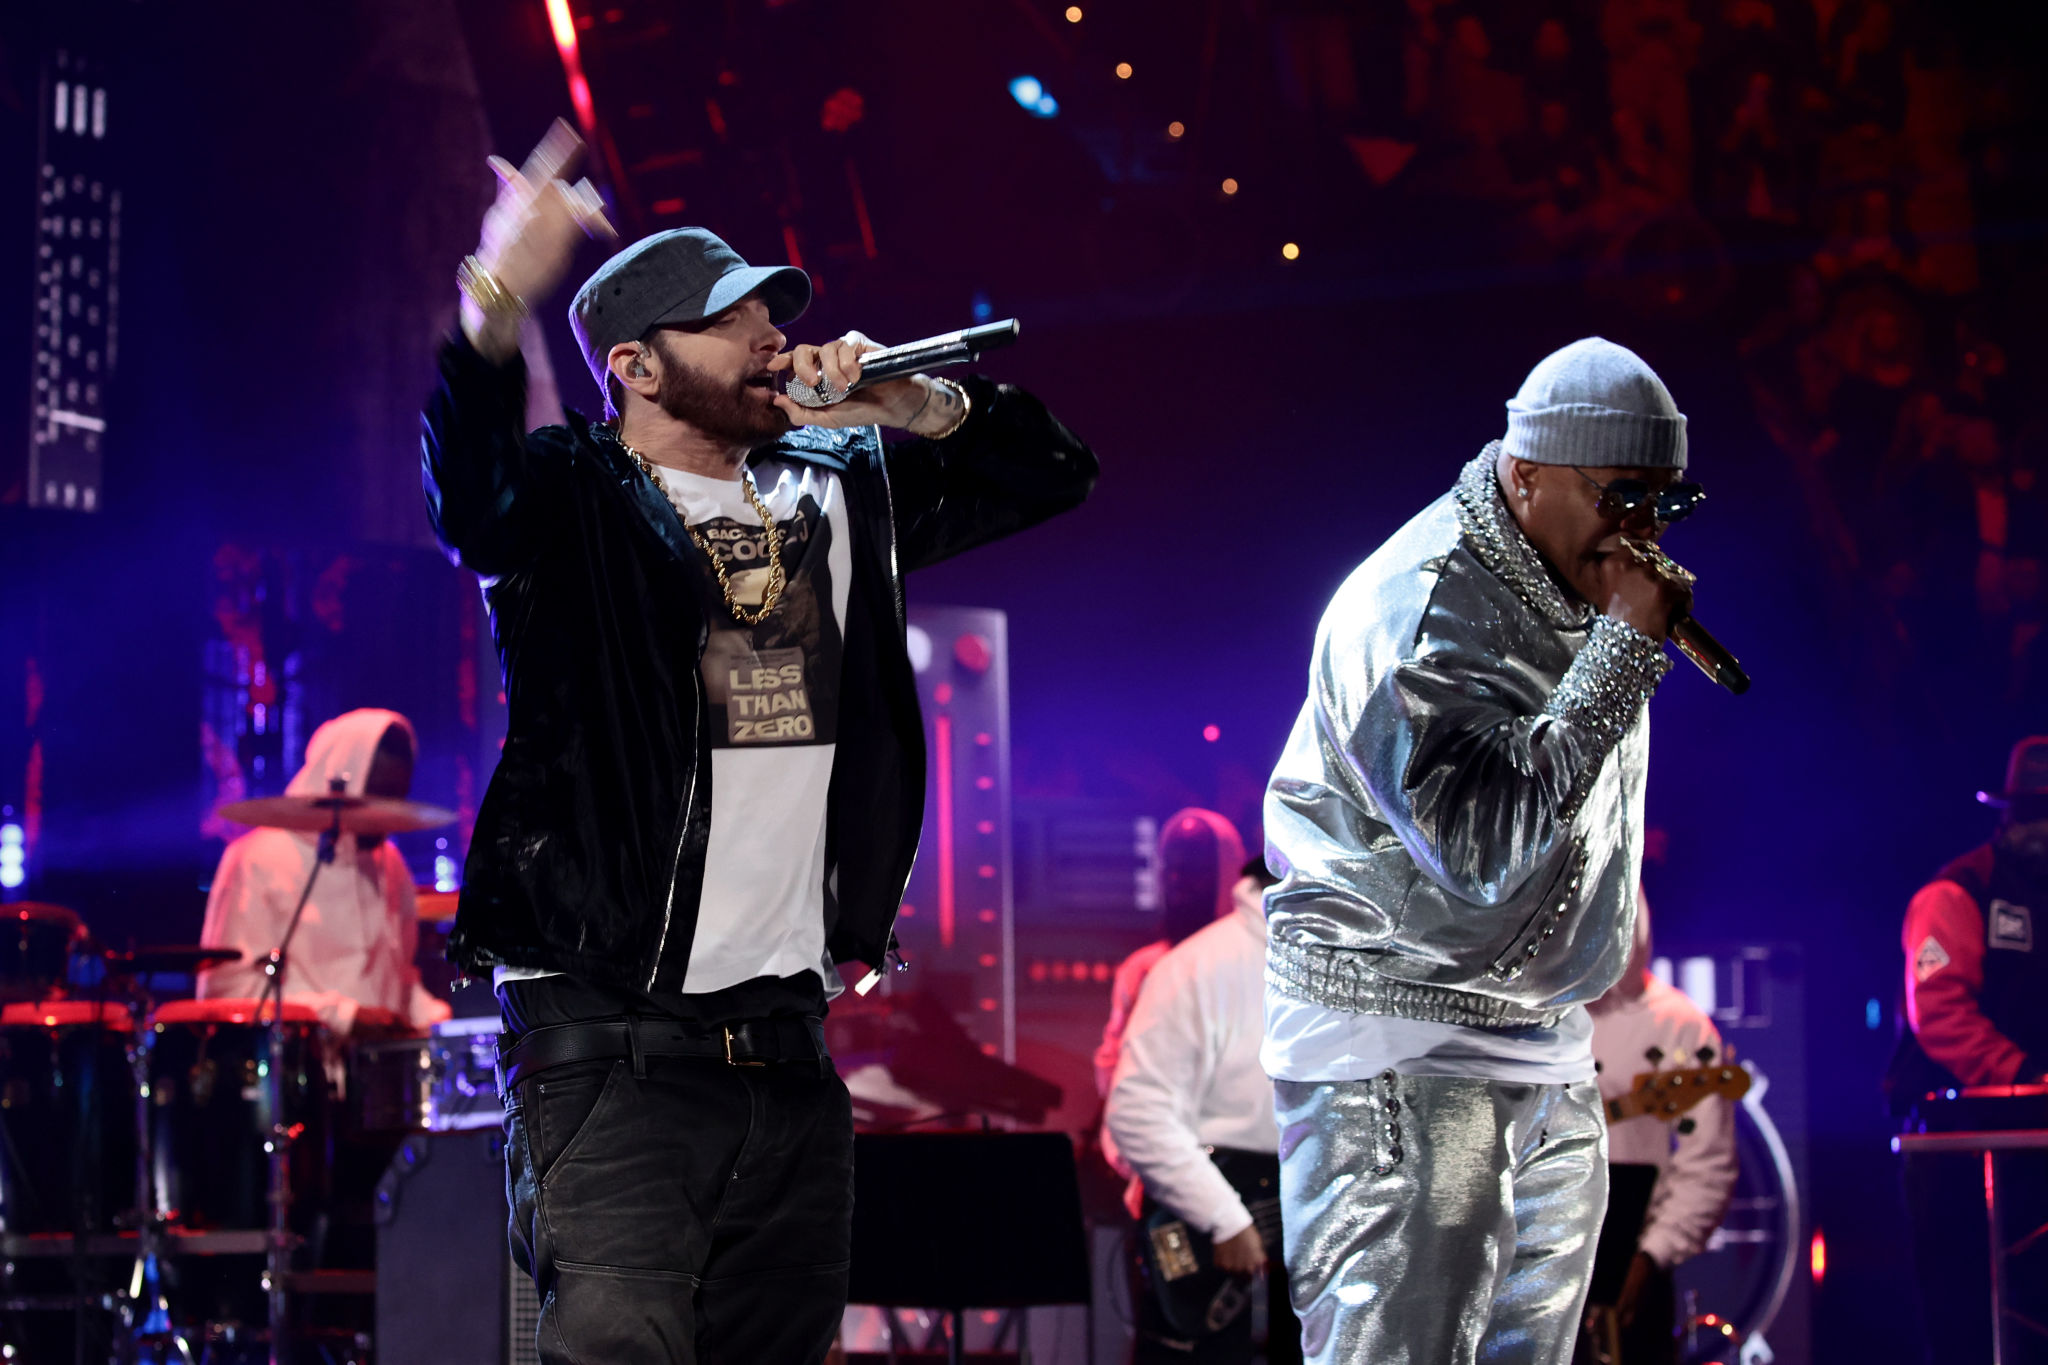 CLEVELAND, OHIO - OCTOBER 30: Eminem and LL Cool J perform onstage during the 36th Annual Rock & Roll Hall Of Fame Induction Ceremony at Rocket Mortgage Fieldhouse on October 30, 2021 in Cleveland, Ohio. (Photo by Dimitrios Kambouris/Getty Images for The Rock and Roll Hall of Fame )